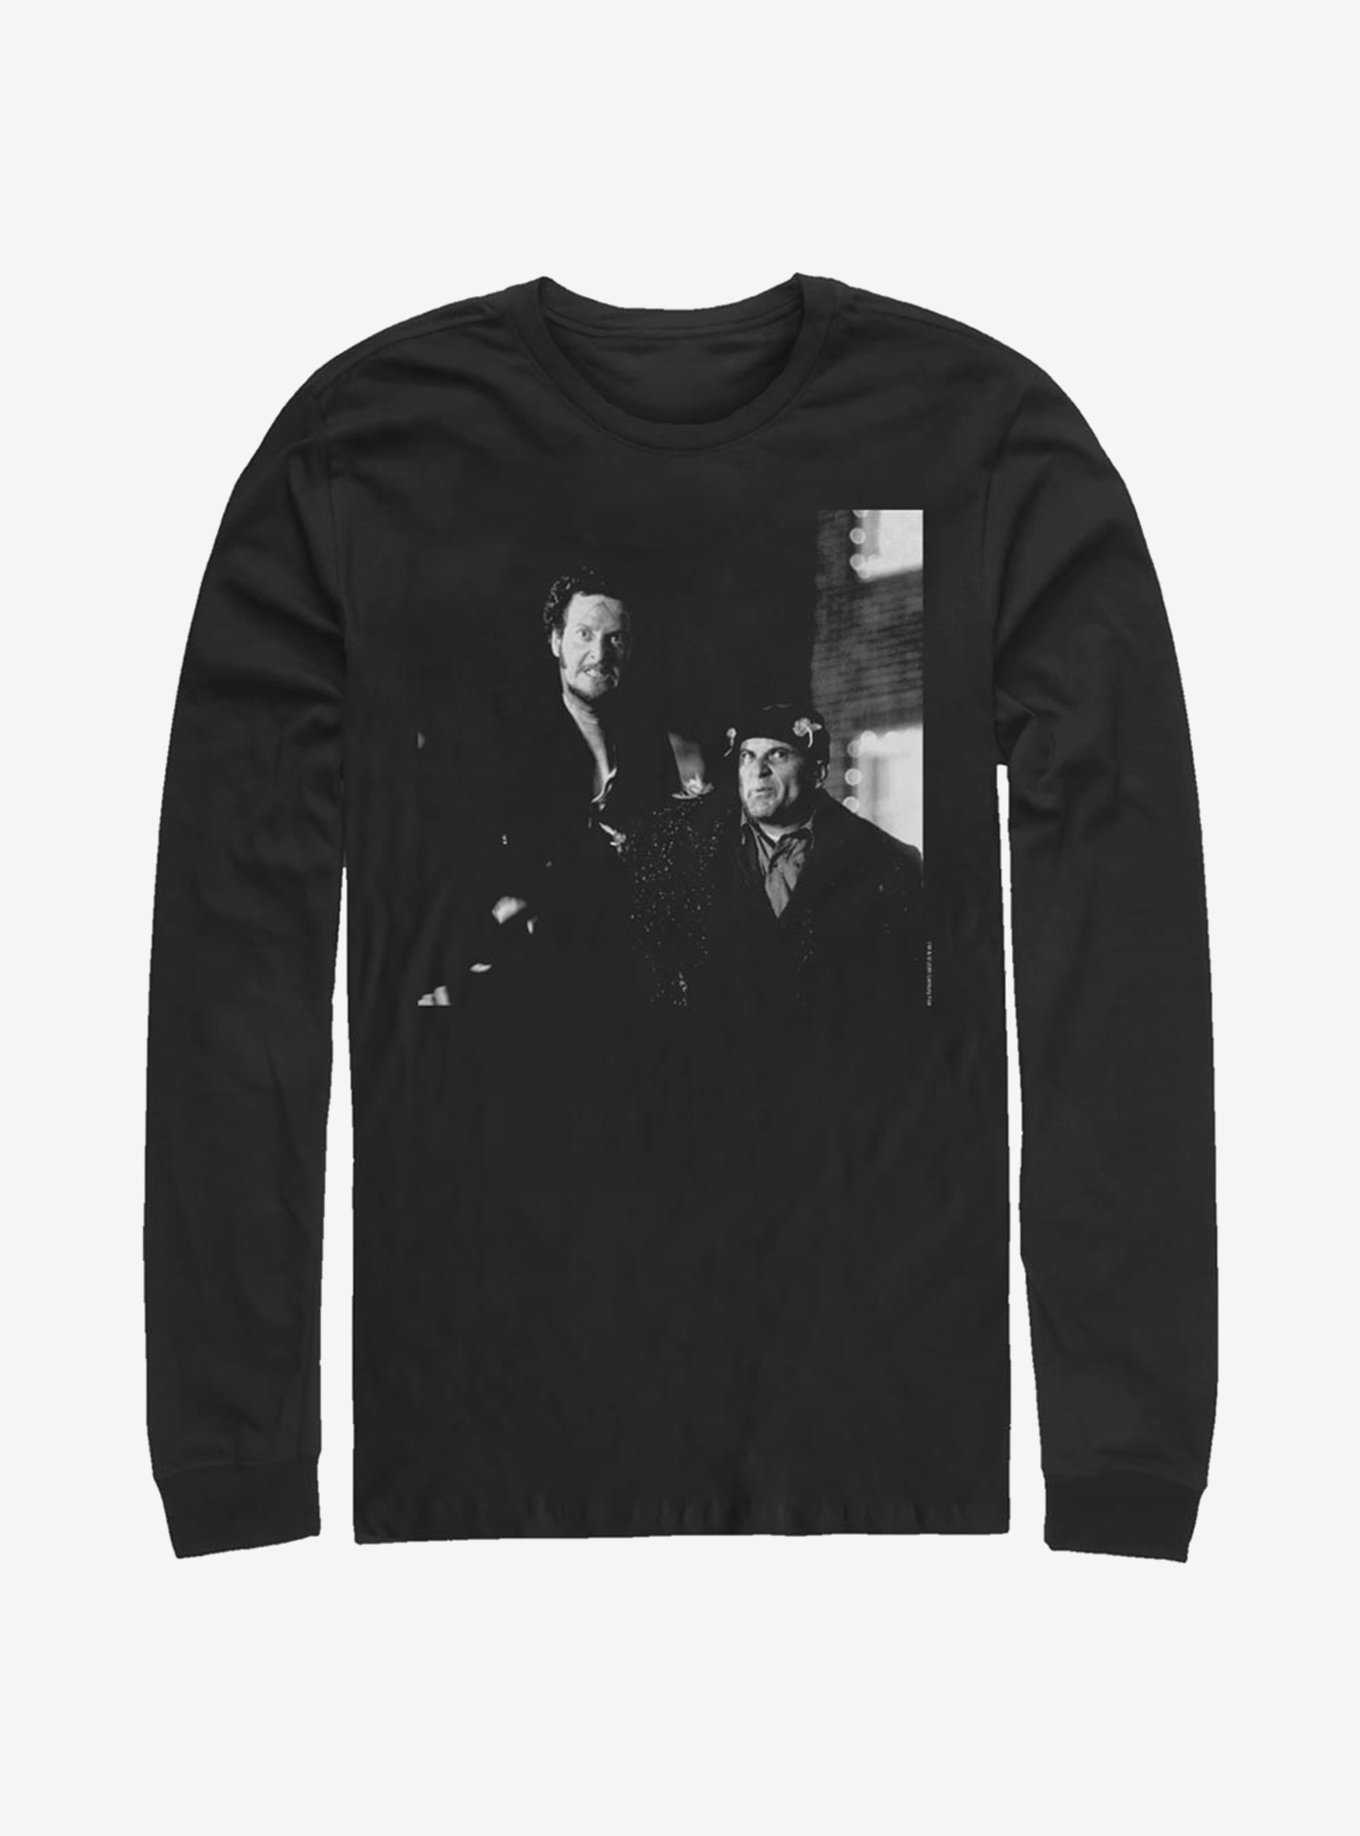 Home Alone Harry And Marv Photo Long-Sleeve T-Shirt, , hi-res